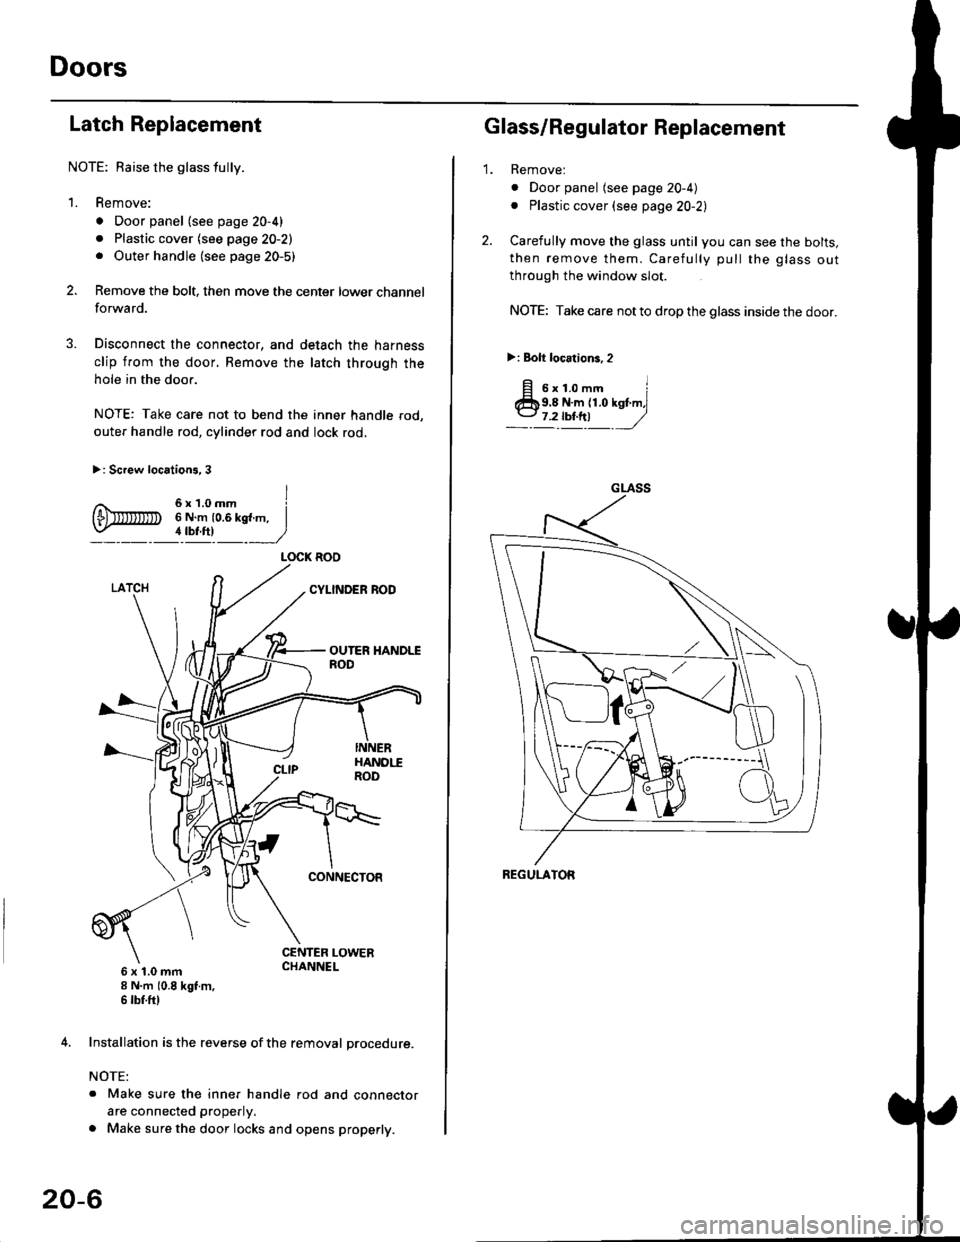 HONDA CIVIC 1998 6.G Workshop Manual Doors
Latch Replacement
NOTE: Baise the glass fully.
1. Remove:
. Door panel (see page 20-4)
. Plastic cover (see page 20-2). Outer handle (see page 20-5)
Remove the bolt, then move the center lower c